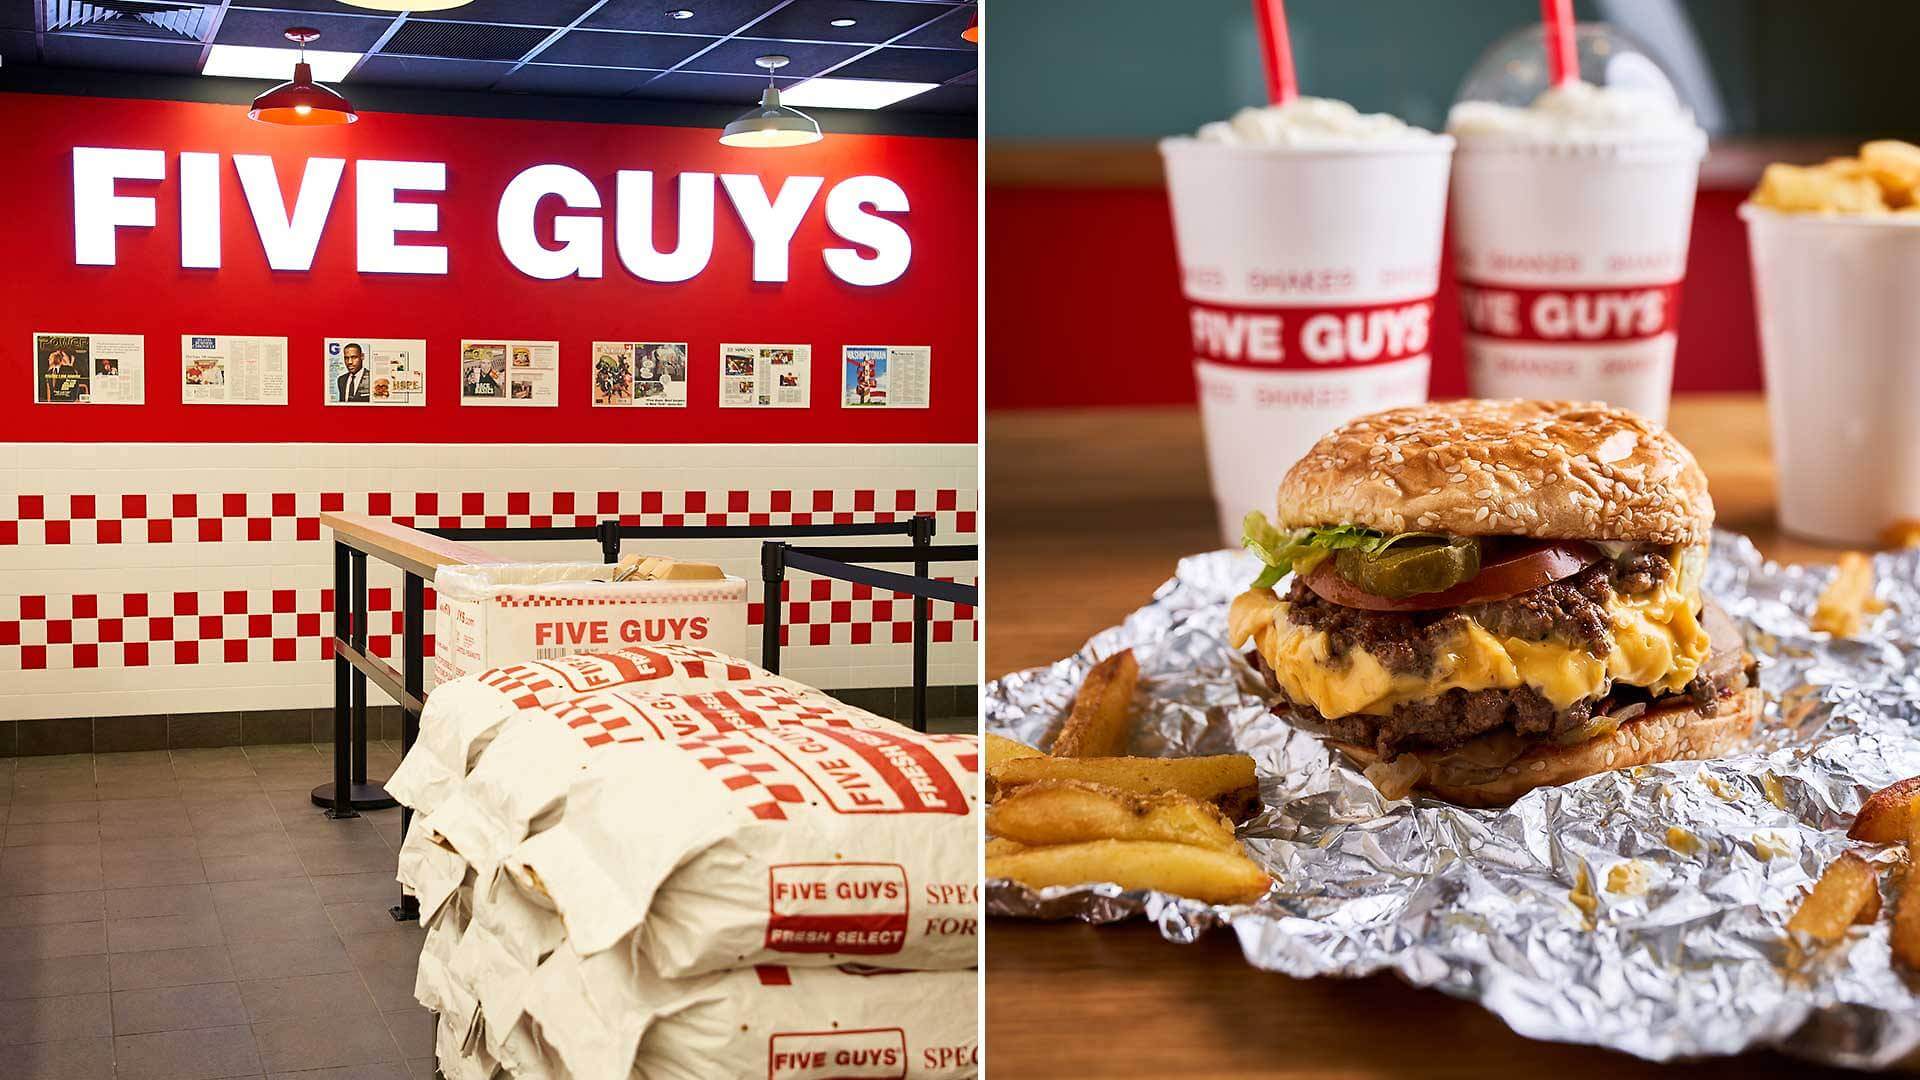 FiveGuys.com/Survey GUIDE To Win a $25 Gift Card